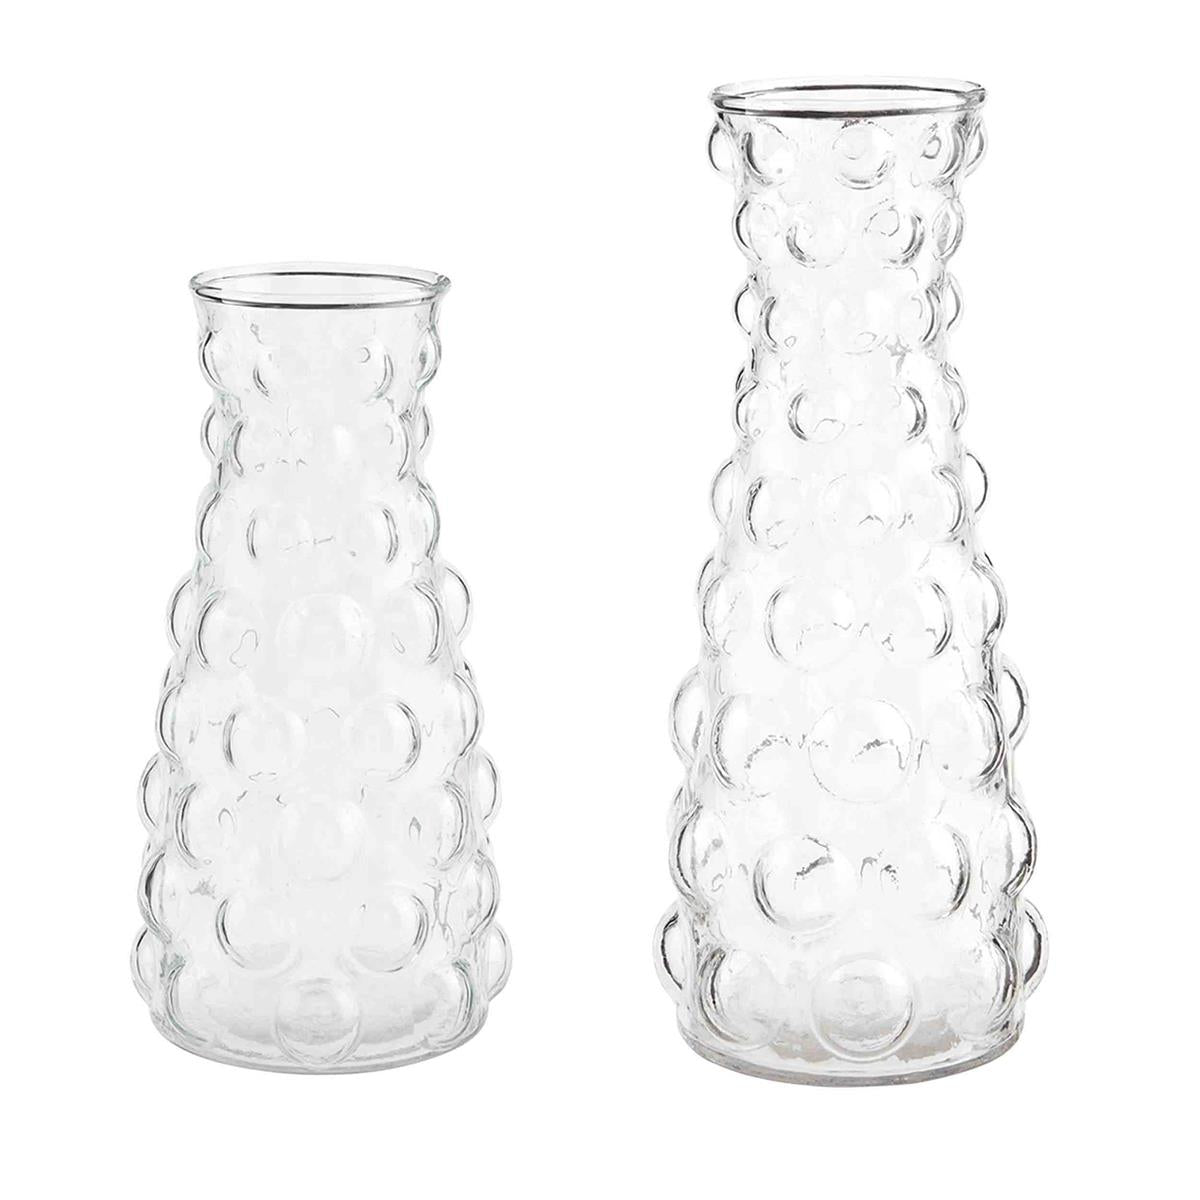 small and large hobnail glass vases displayed against a white background